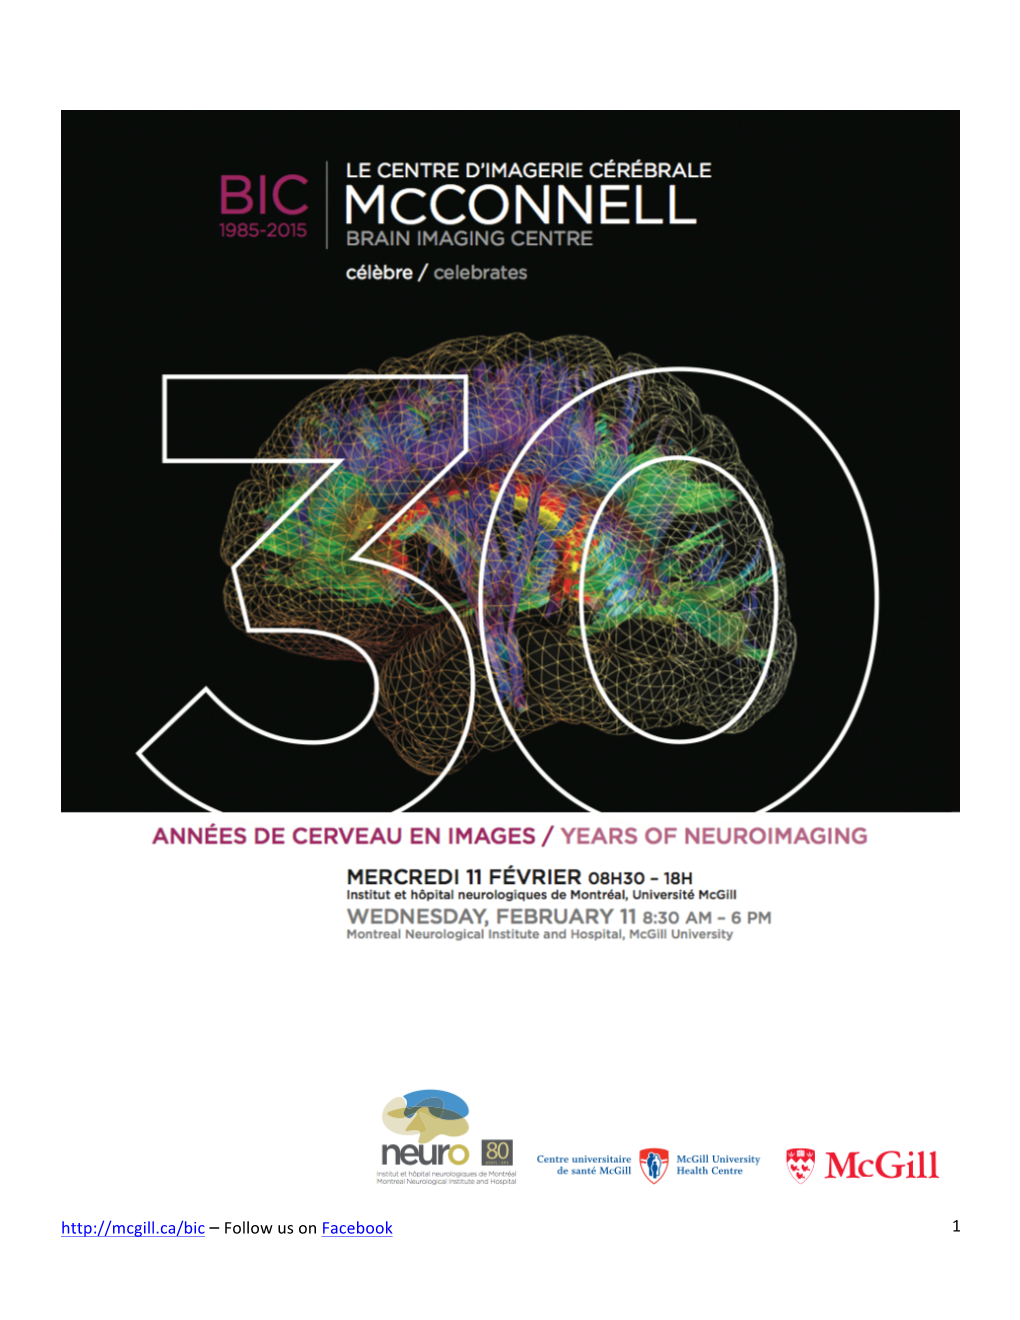 Mcconnell Brain Imaging Centre-30 Years